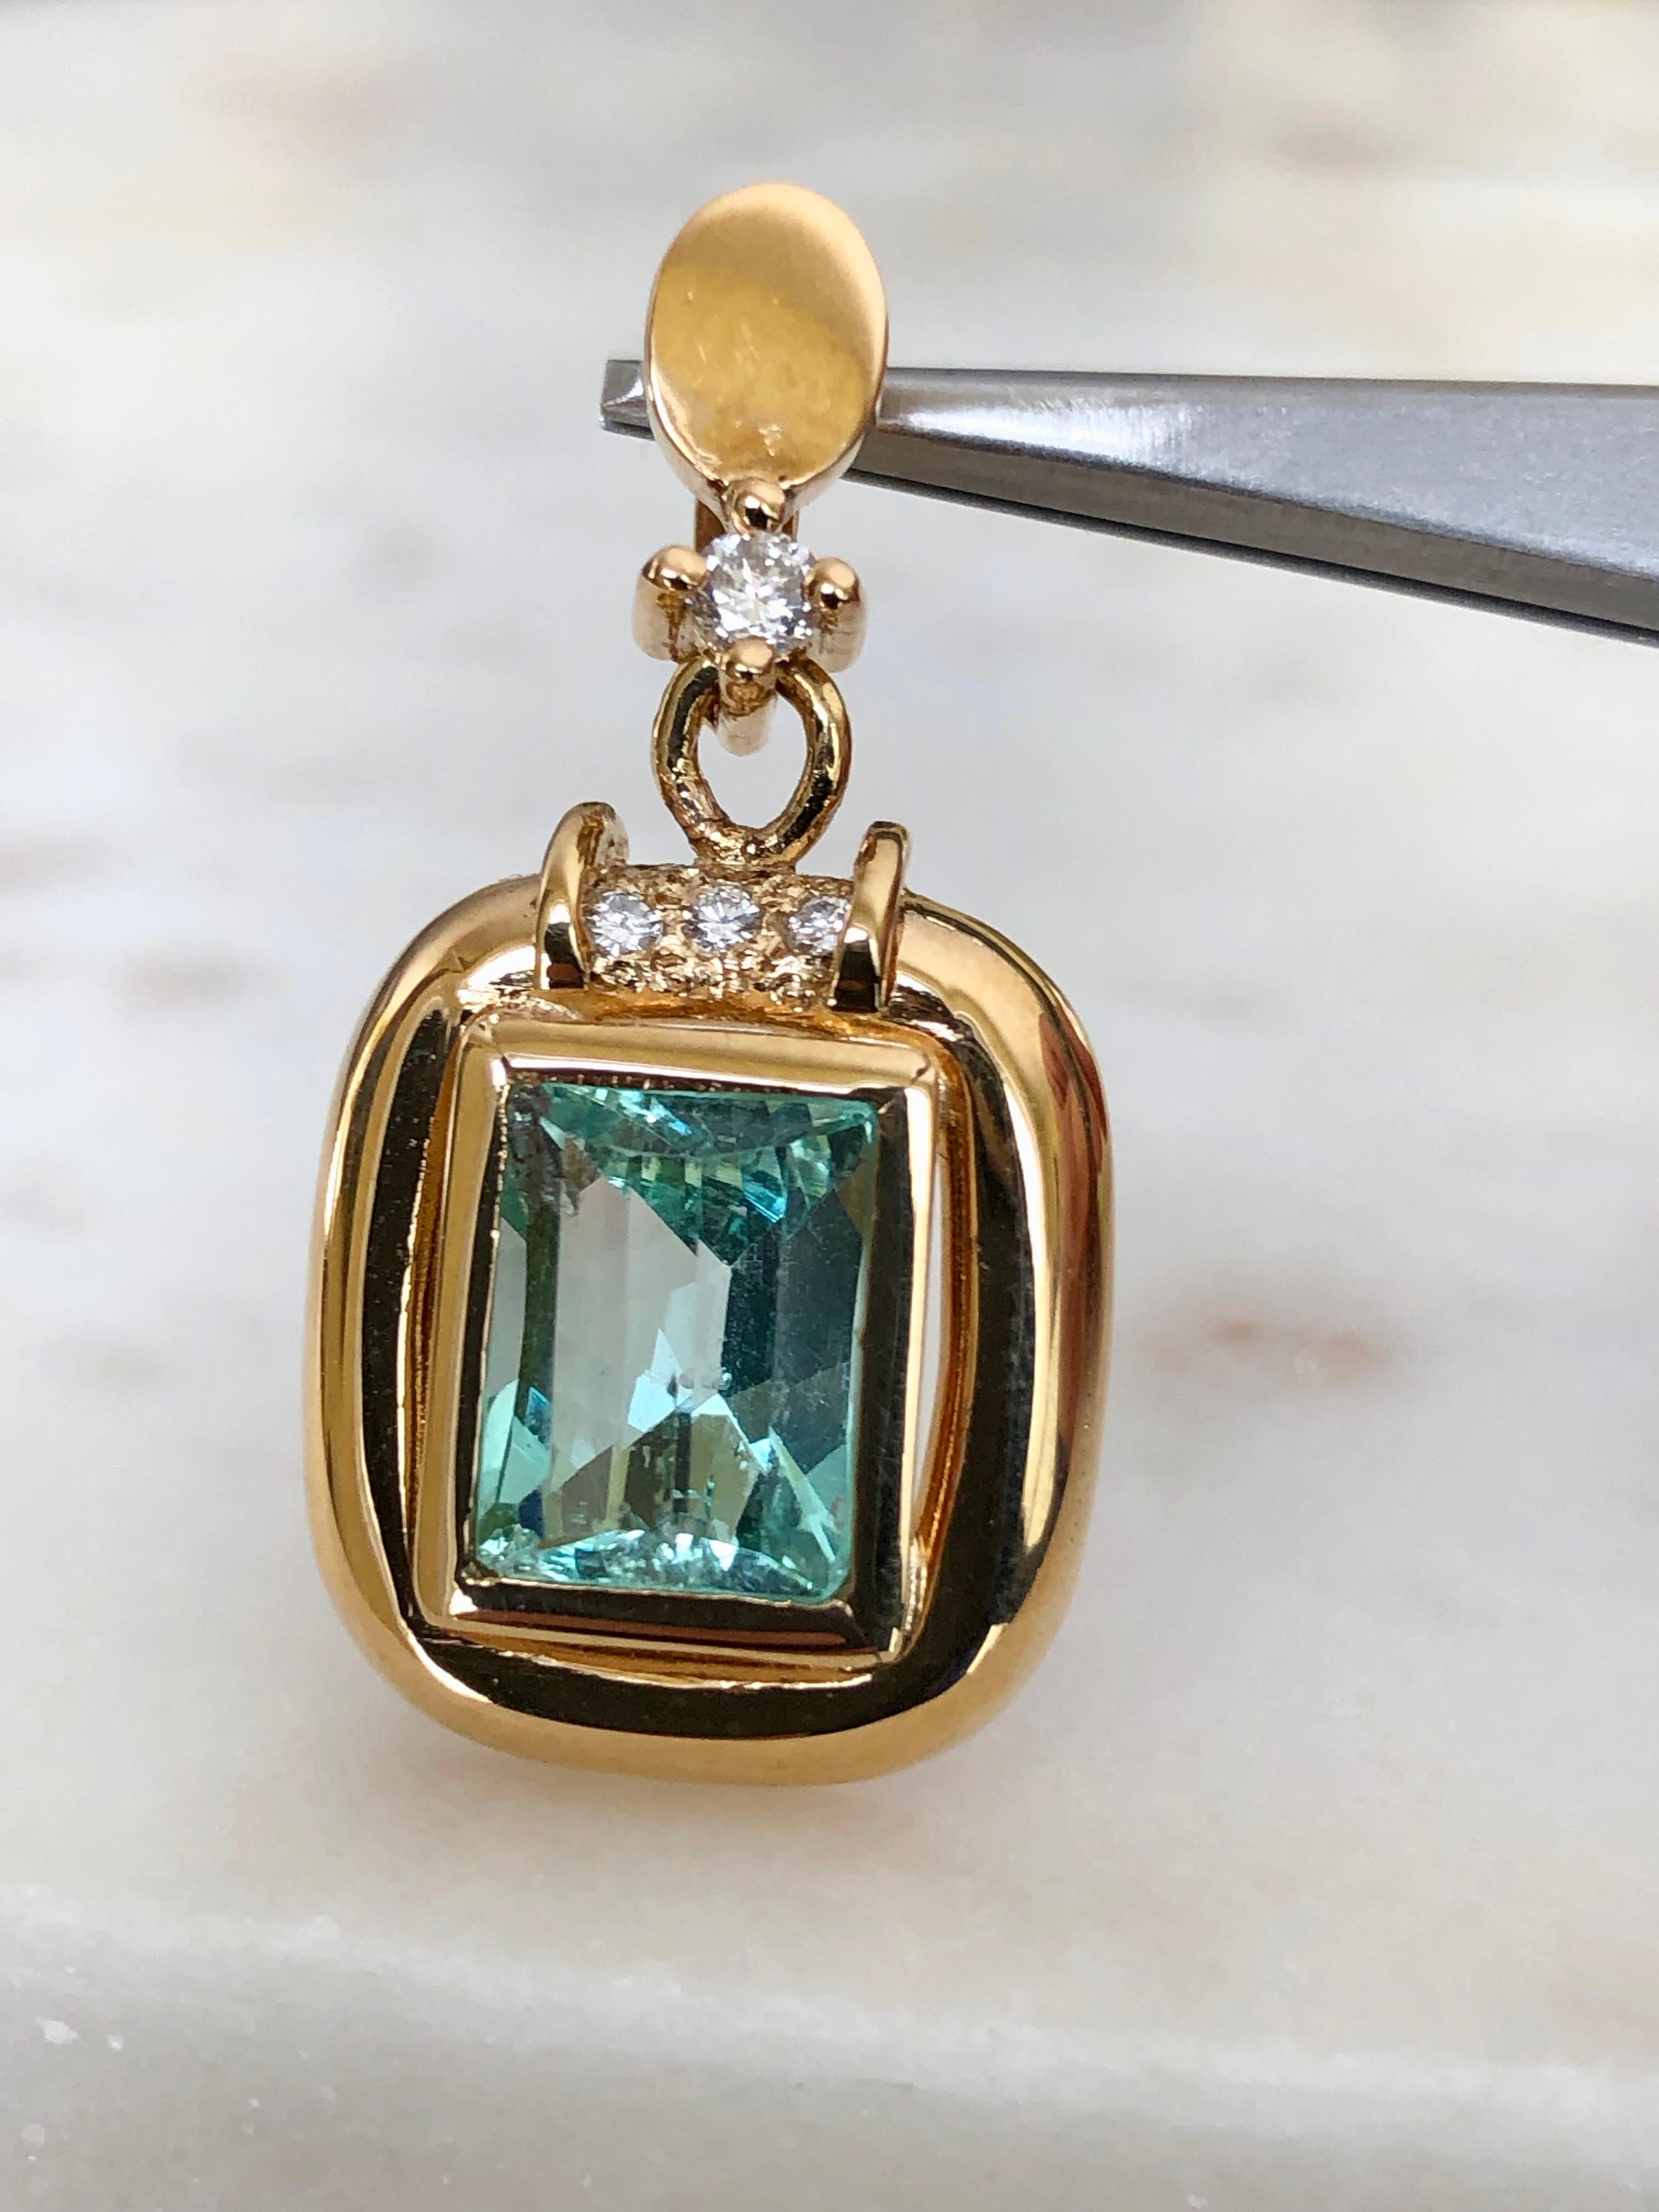 Natural Colombian Emerald 3.00 Carats. Light Green/ Clarity VS. Accented with round cut diamonds 0.12 carats H-SI
Total Gemstone Weight : 3.12 Carats
Pendant Weight: 6.10g
Pendant Measurement: Approx. 30.00mm x 16.50mm
Comments: 100% NATURAL